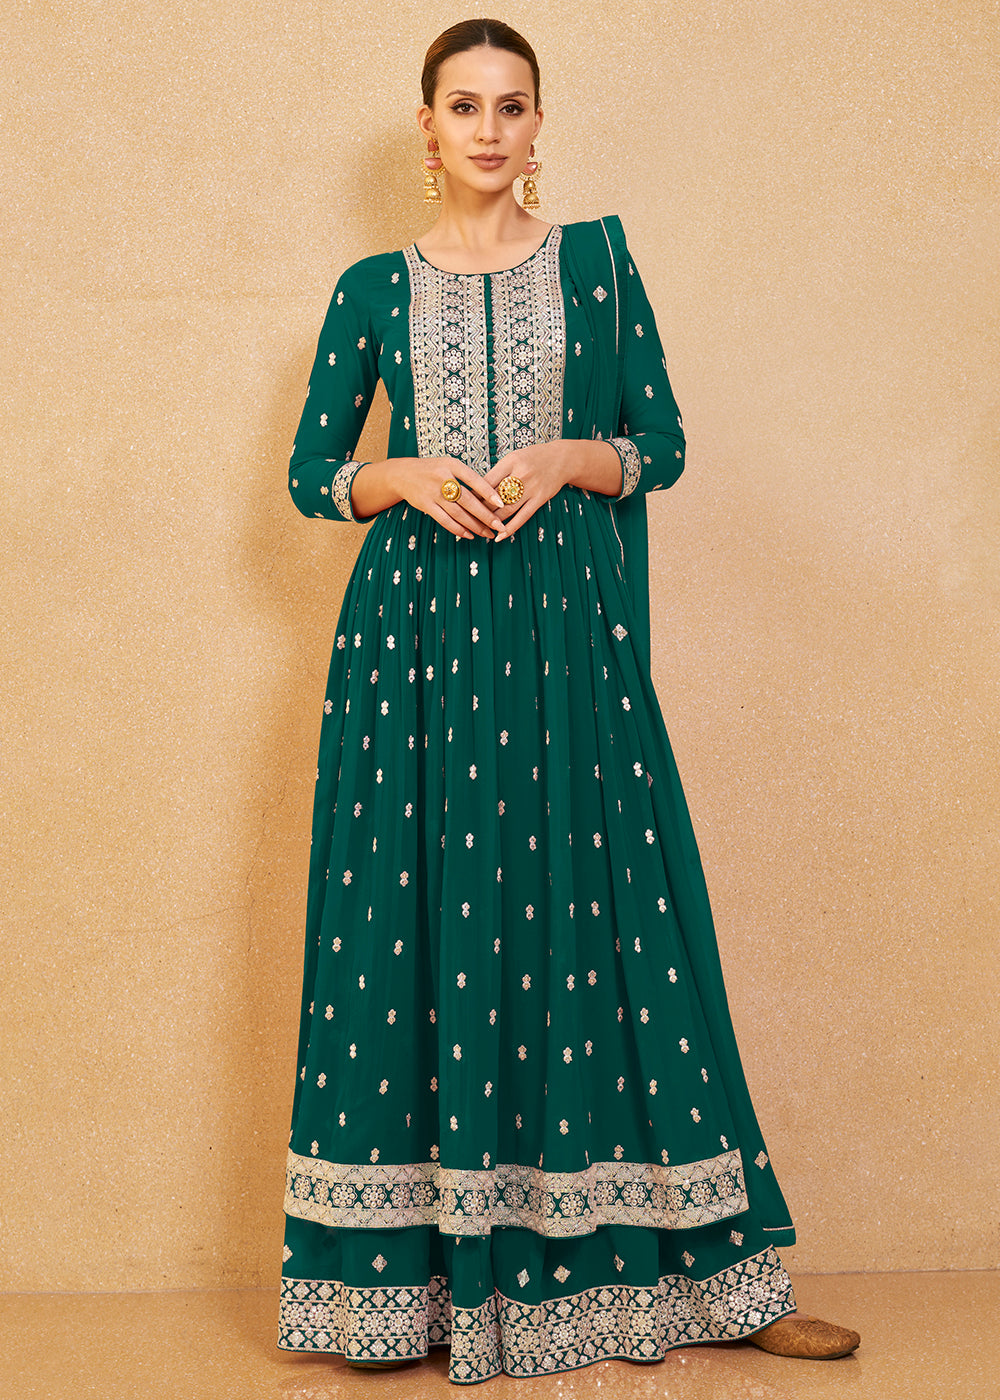 Buy Now Tempting Green Real Georgette Palazzo Style Salwar Suit Online in USA, UK, Canada, Germany, Australia & Worldwide at Empress Clothing. 